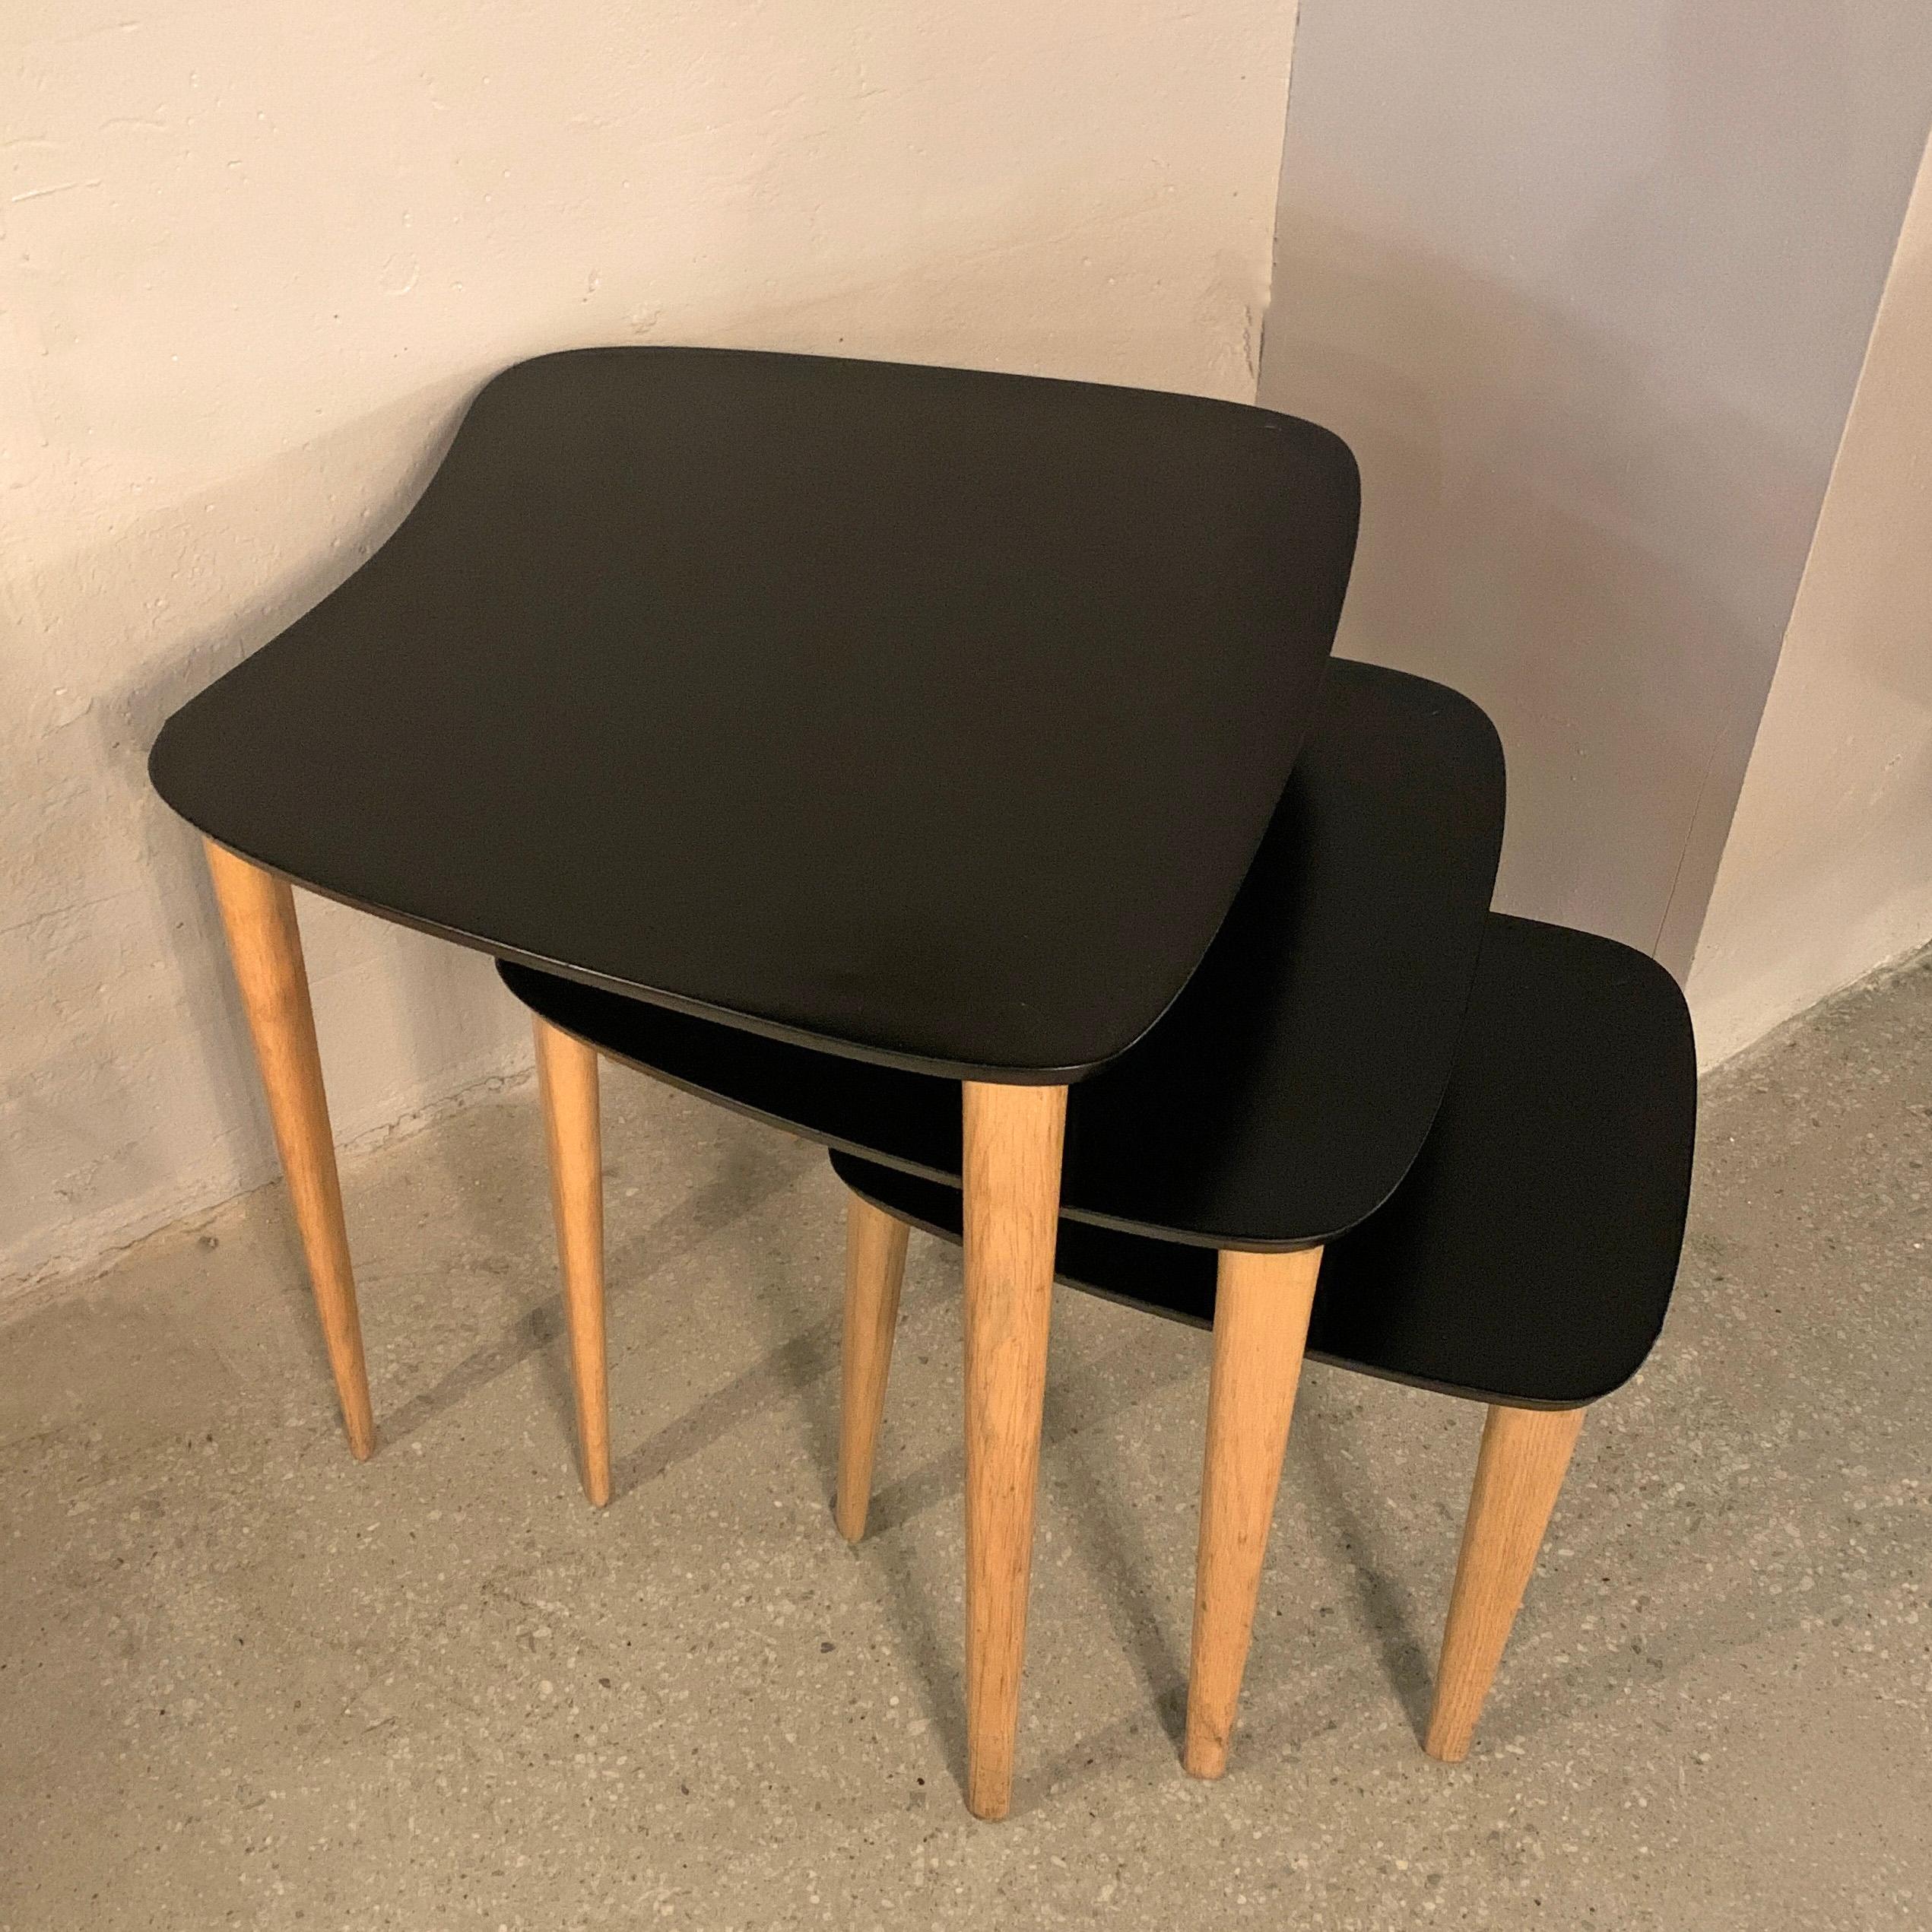 20th Century Mid-Century Modern Black Lacquered Biomorphic Nesting Tables For Sale